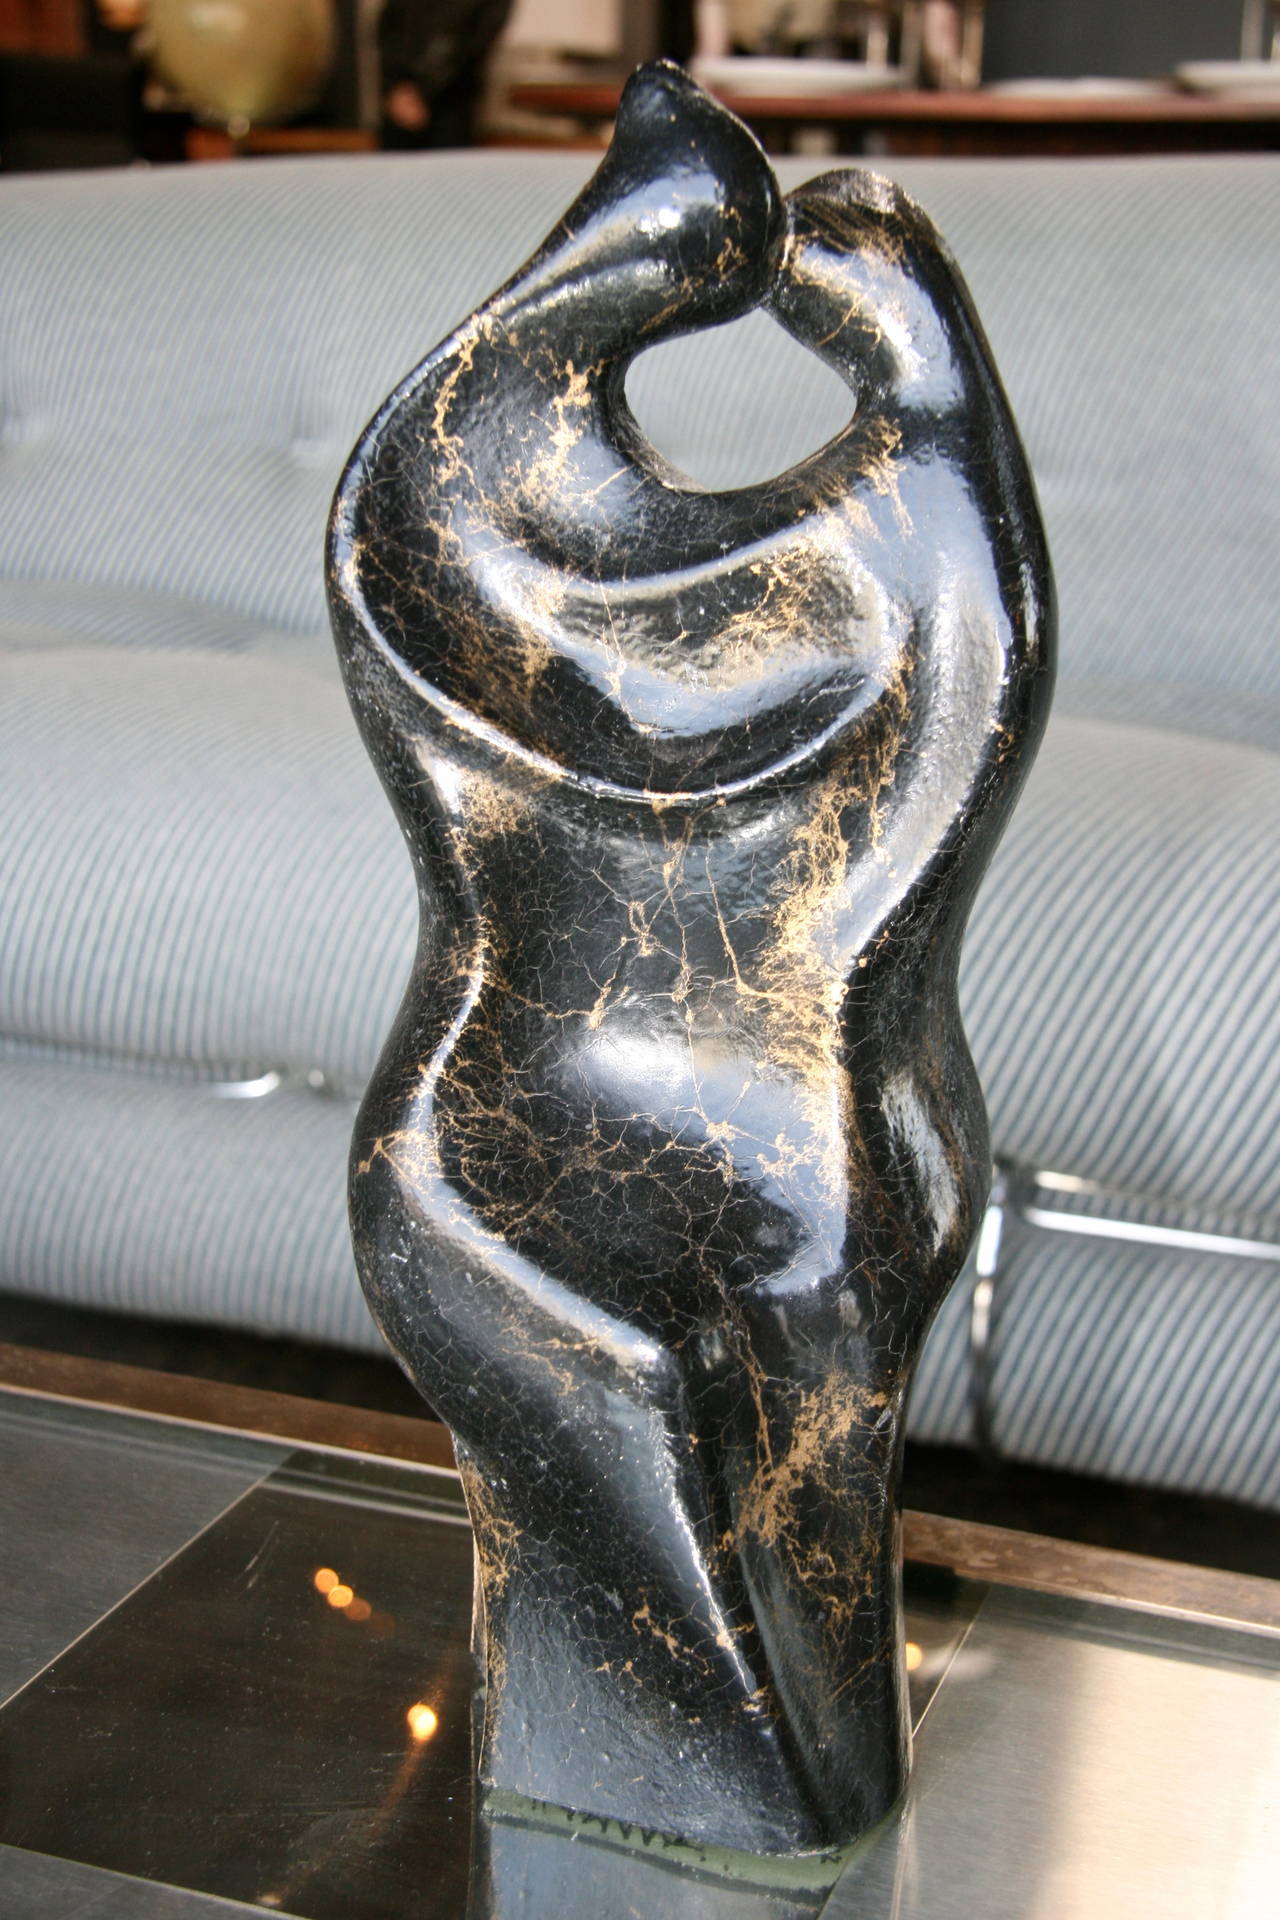 Italian sculpture in gold marble "Amanti" by Gianni Celati.